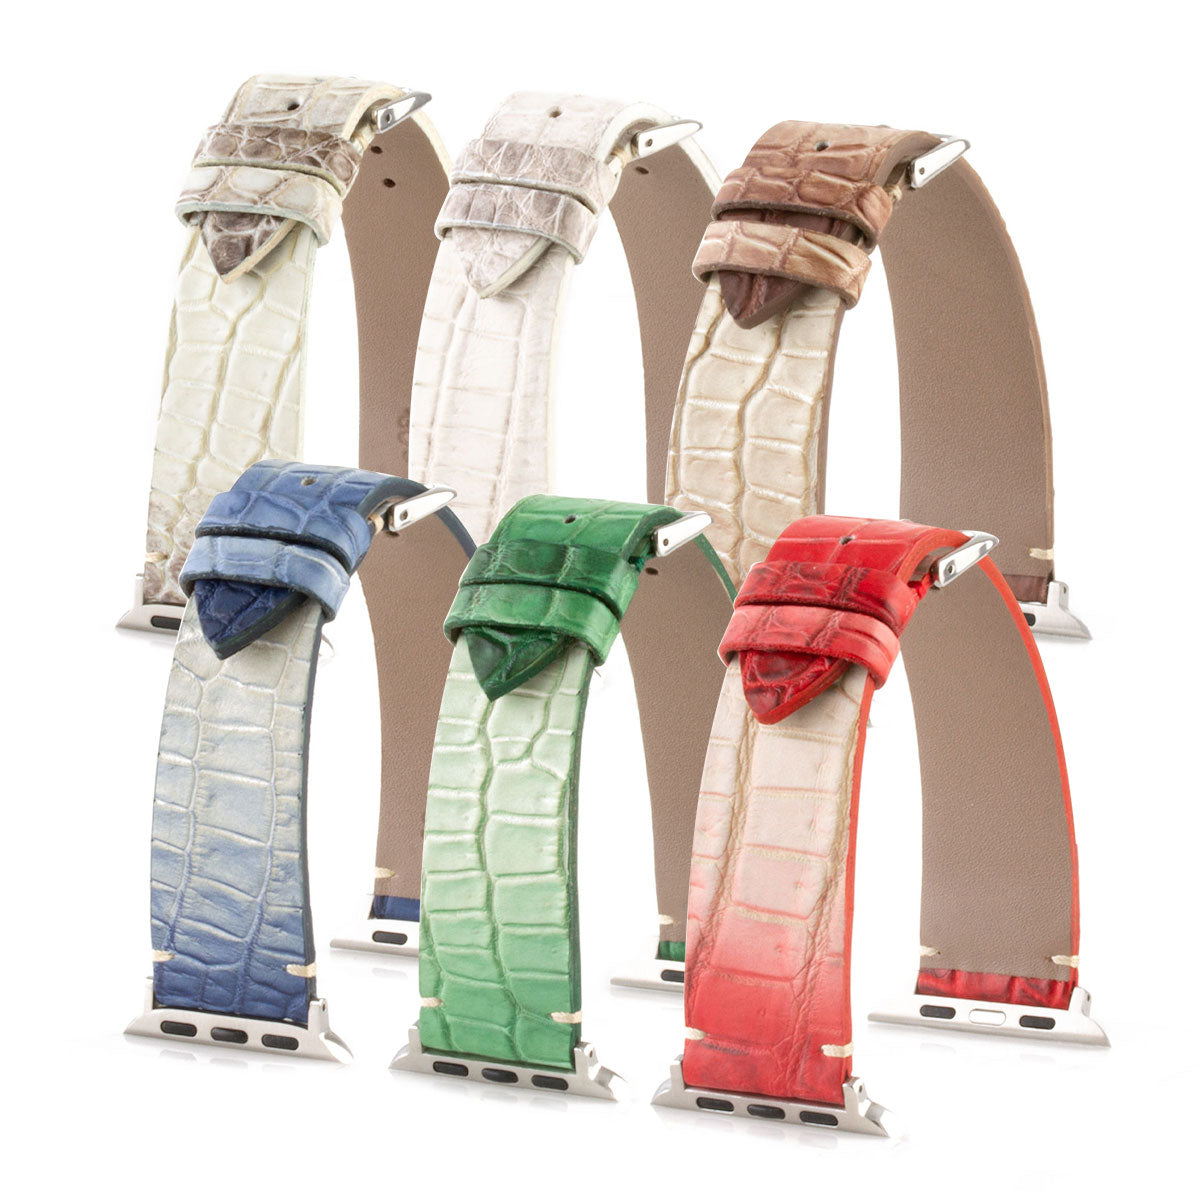 Apple Watch - "Himalaya" leather watch band - Alligator (grey, blue, green, brown, red)